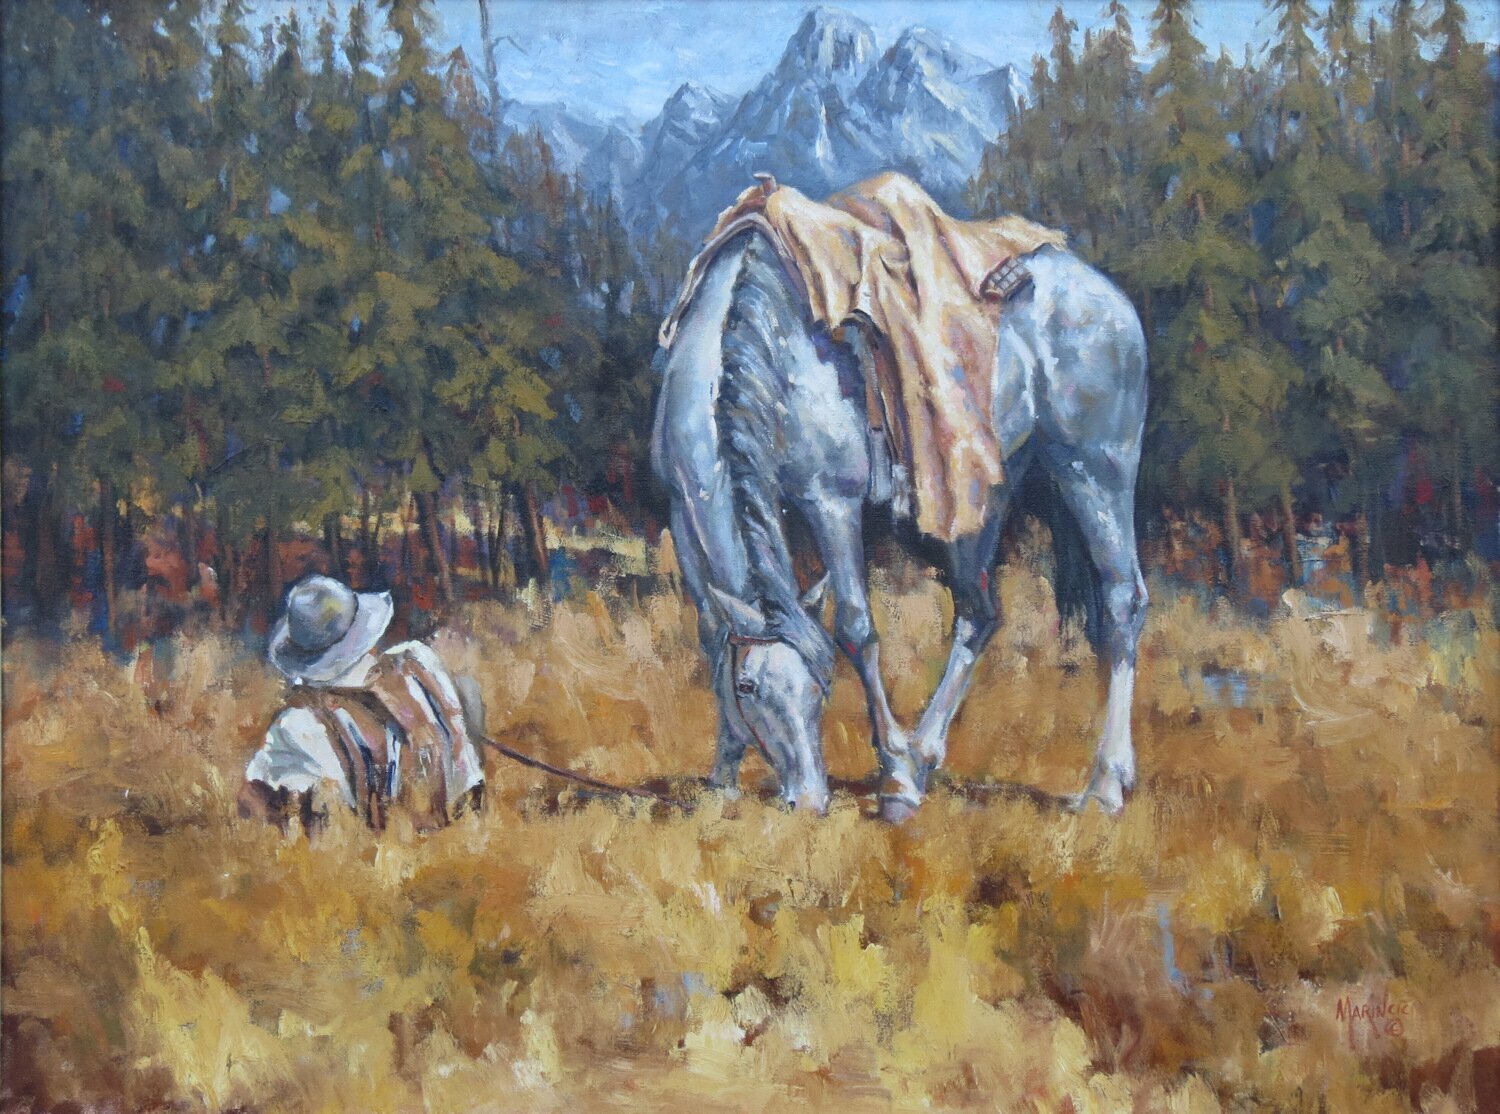 Donny Marincic; High Country, 2000, Original Painting Oil, 30 x 40 inches. Artwork description: 241 A Mountain Man resting his pony while enjoying the land he calls home. ...